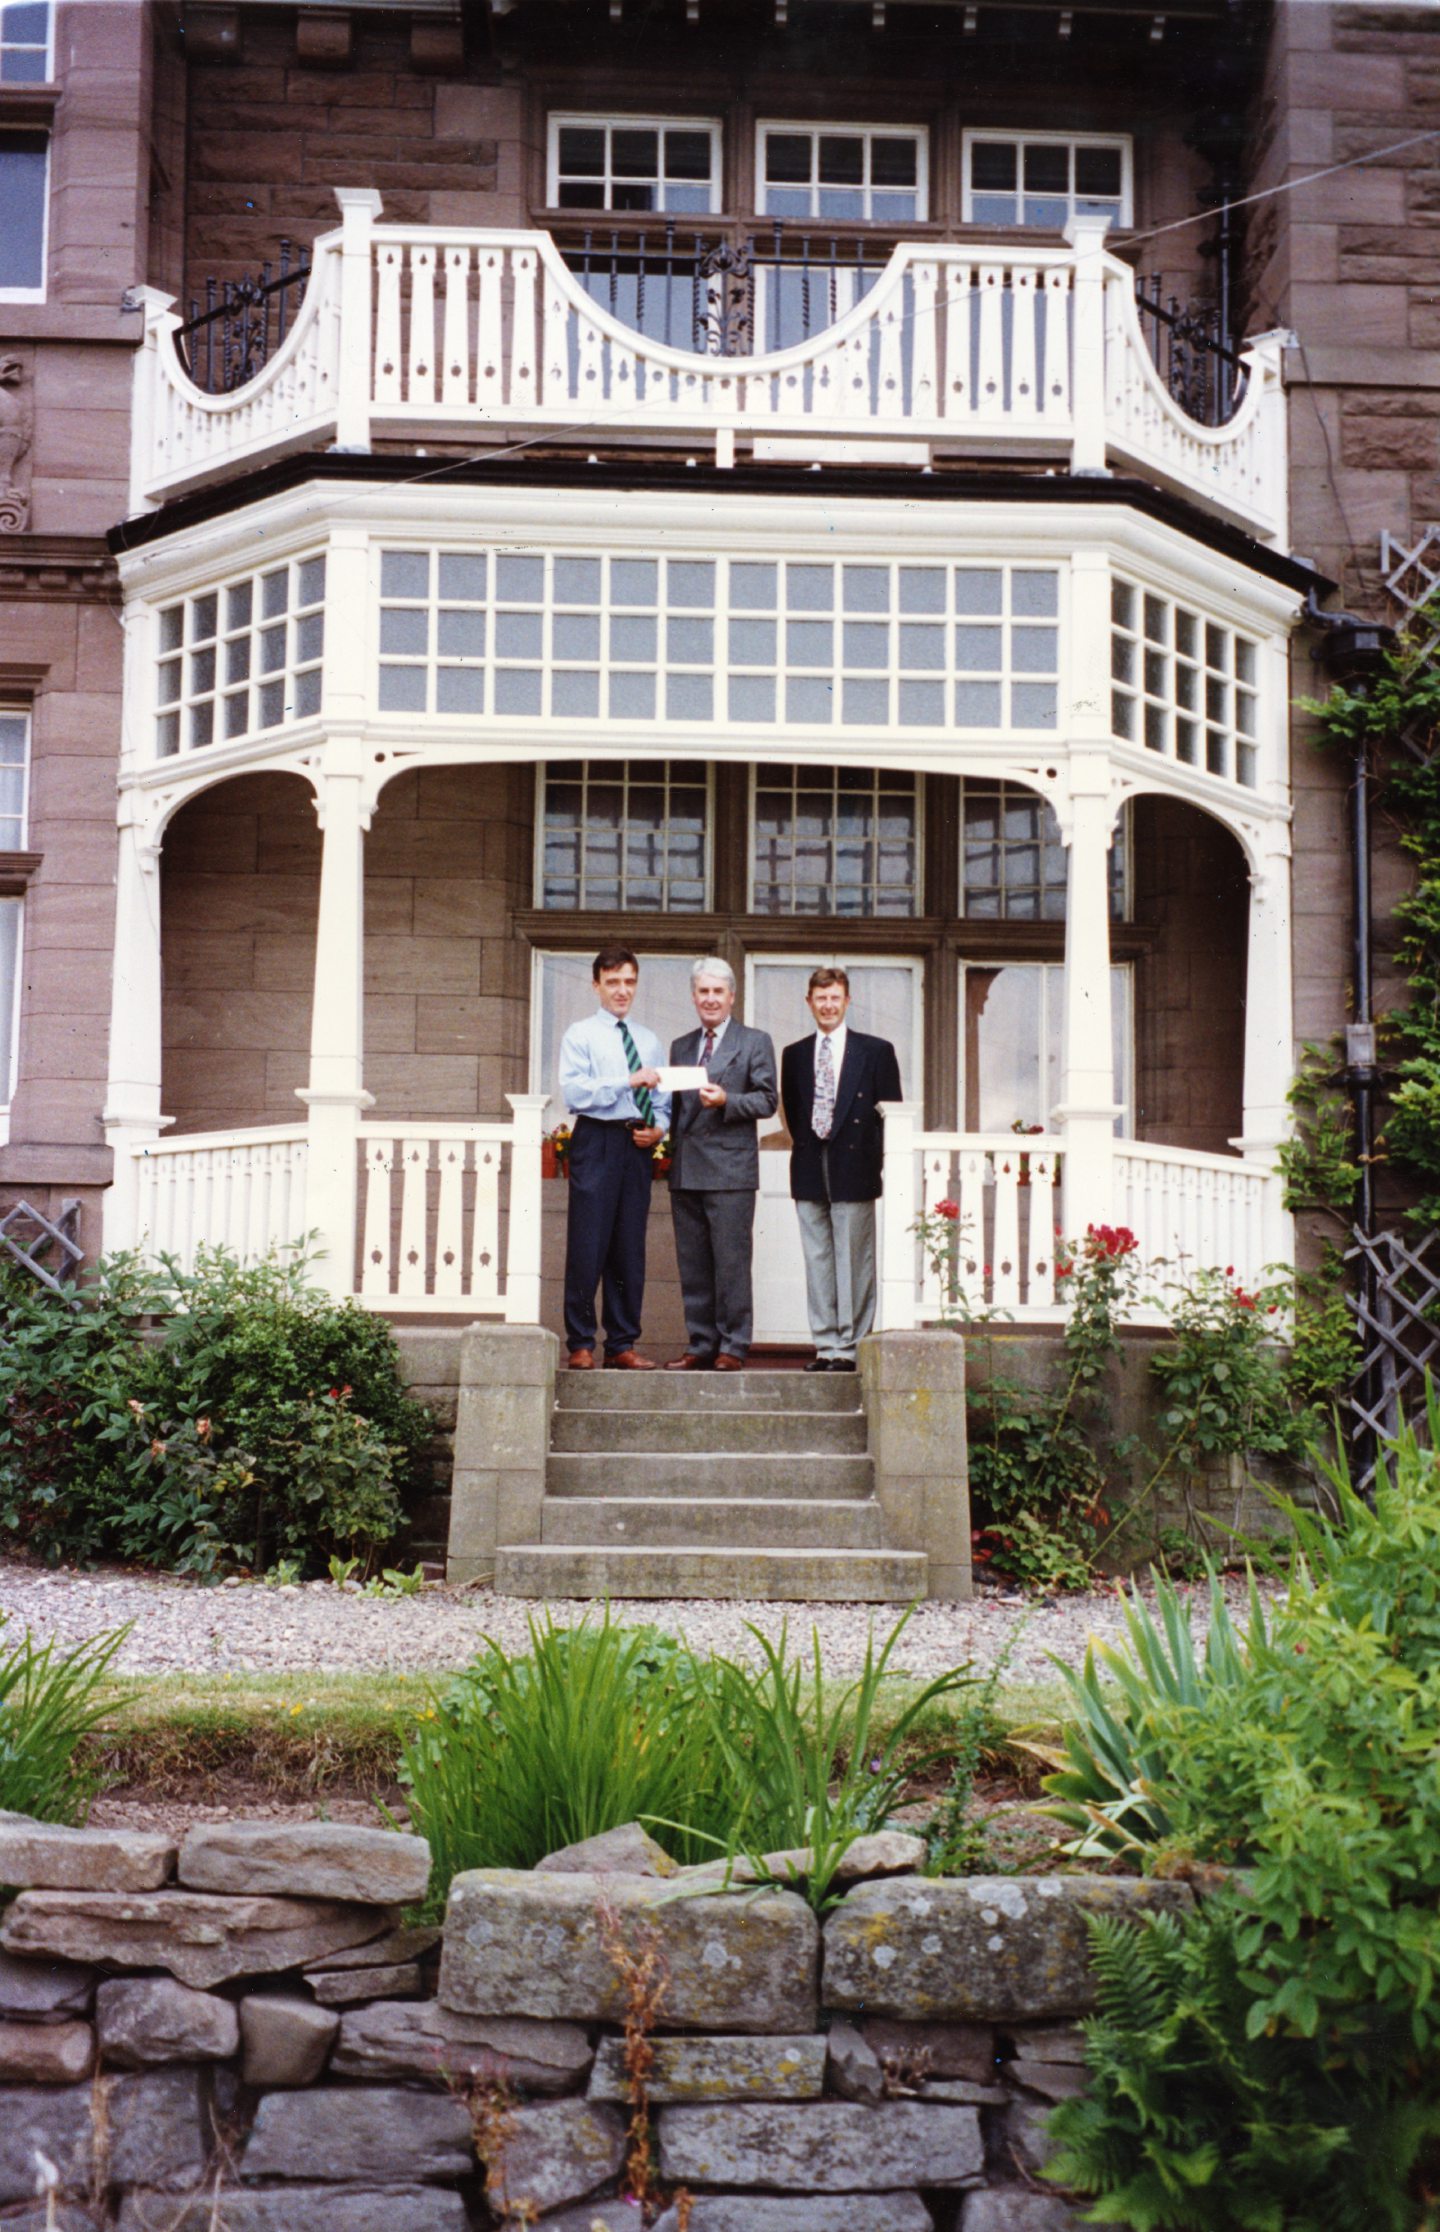 Neil Sword, Cllr Andy Lynch and architect Nigel Gillan outside Aystree House